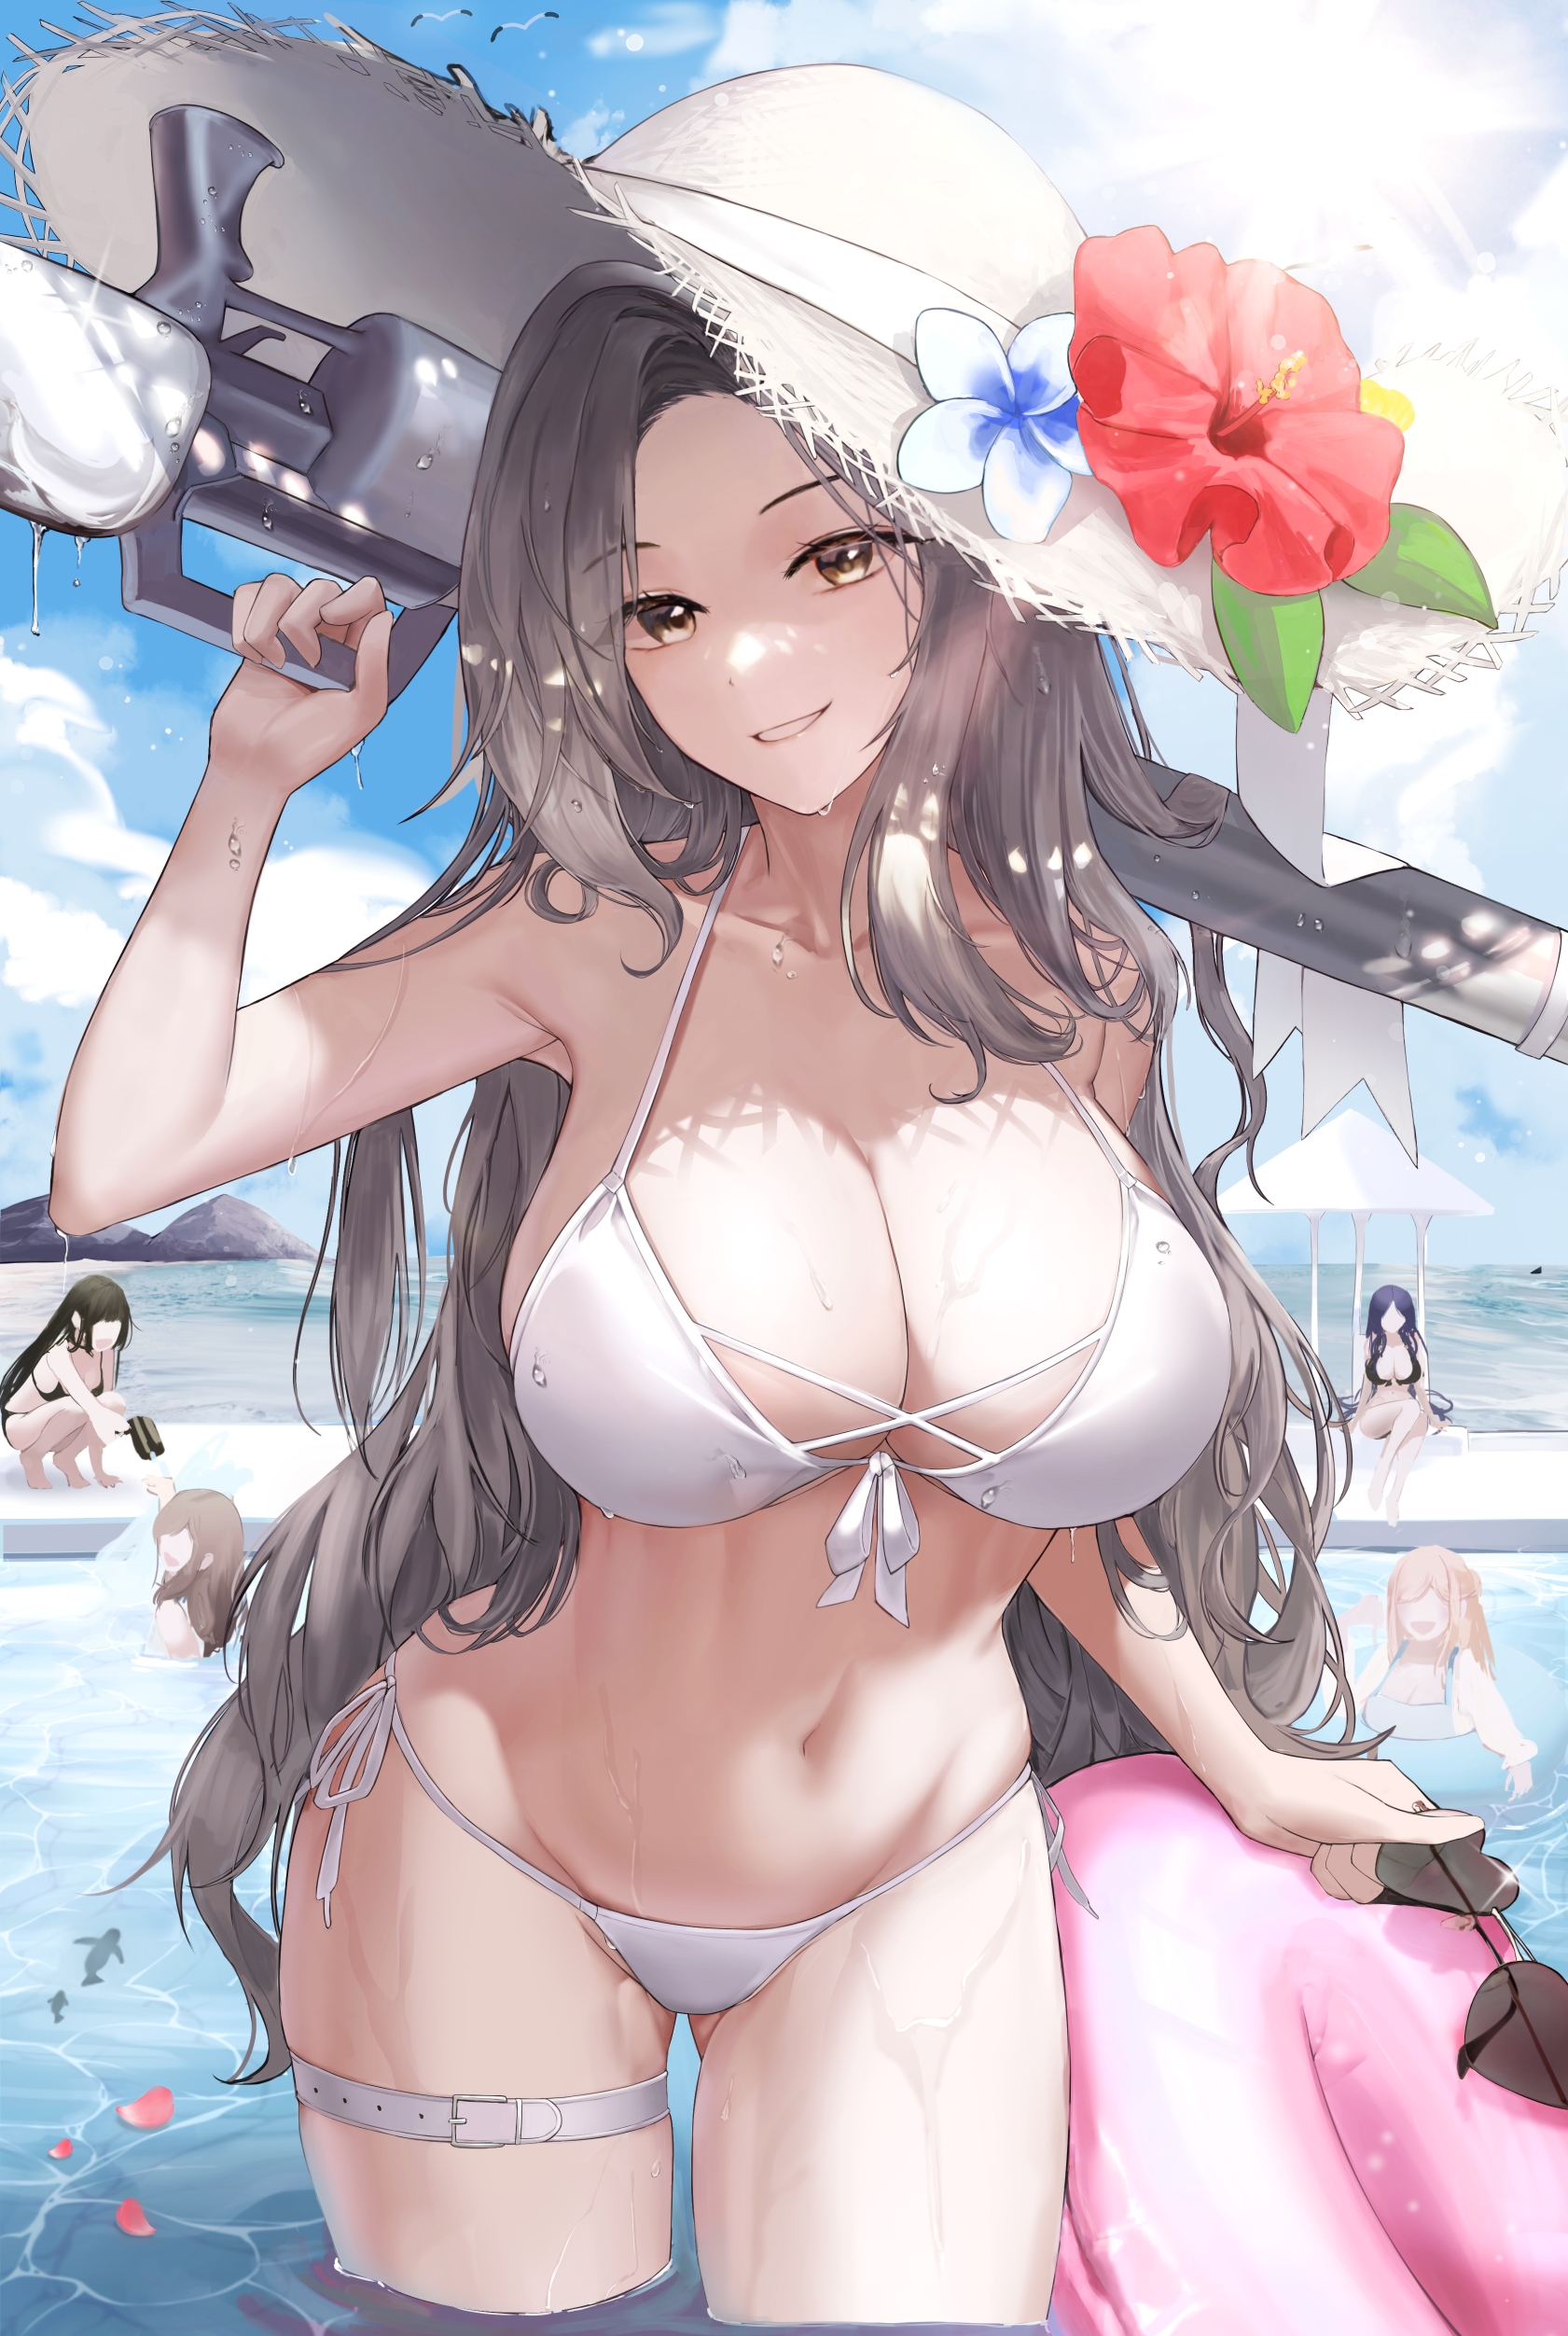 Anime 1681x2504 anime girls portrait display group of women women bikini wet swimsuit wet looking at viewer standing in water water dalla (888 dalae) sun hats water guns white bikini wet hair yellow eyes gray hair string bikini petals straw hat hibiscus big boobs cleavage flowers smiling sunlight clouds belly button belly swimming pool hat dappled sunlight sunglasses long hair floater heart sunglasses